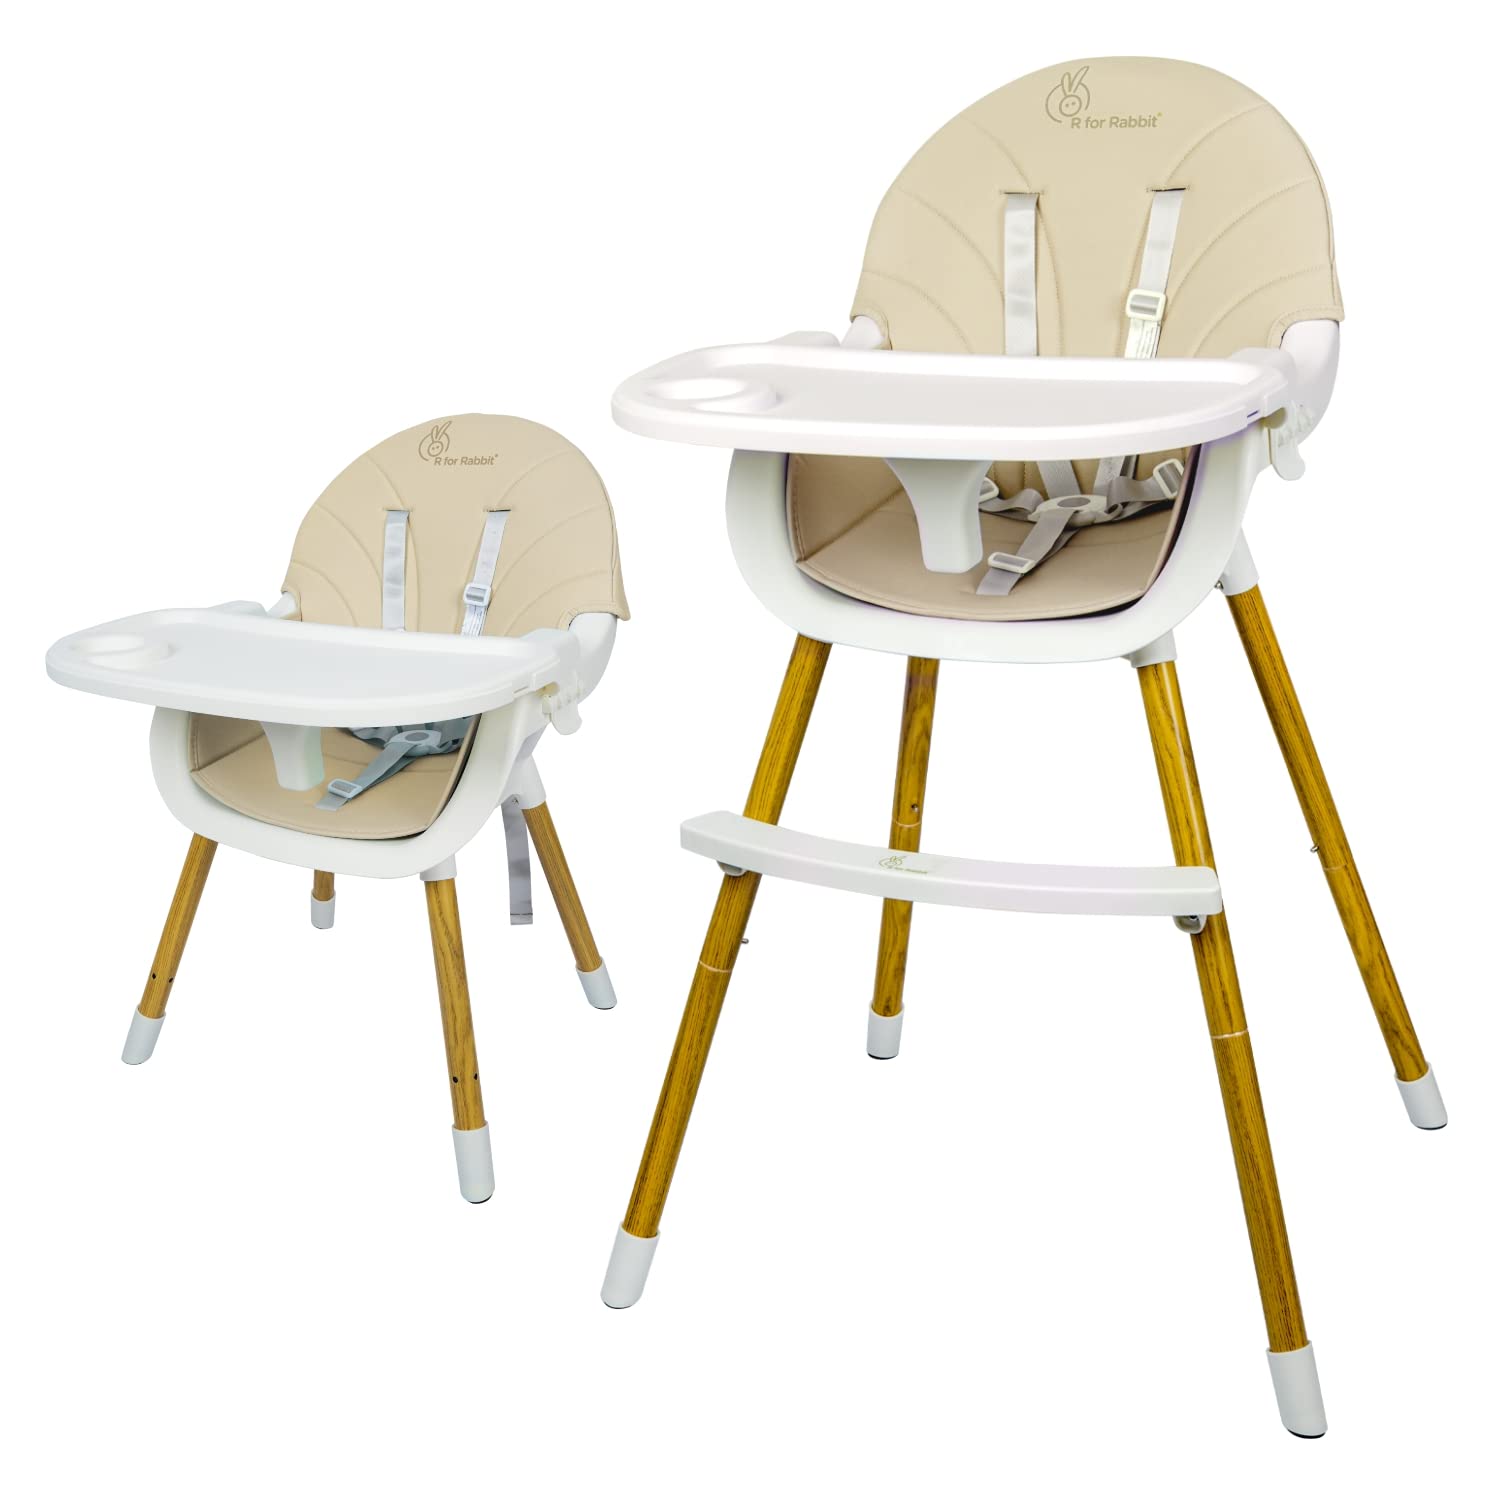 Star of Baby Walnut 4 in 1 Multifunctional Baby Feeding High Chair for Kids | Smart Kids Feeding Booster Chair | Kids Feeding Chair |360 Degree Rotatable Seat With 7 Recline Positions | High Stool for Baby Age 6 Months to 36 Months ( Graphite )